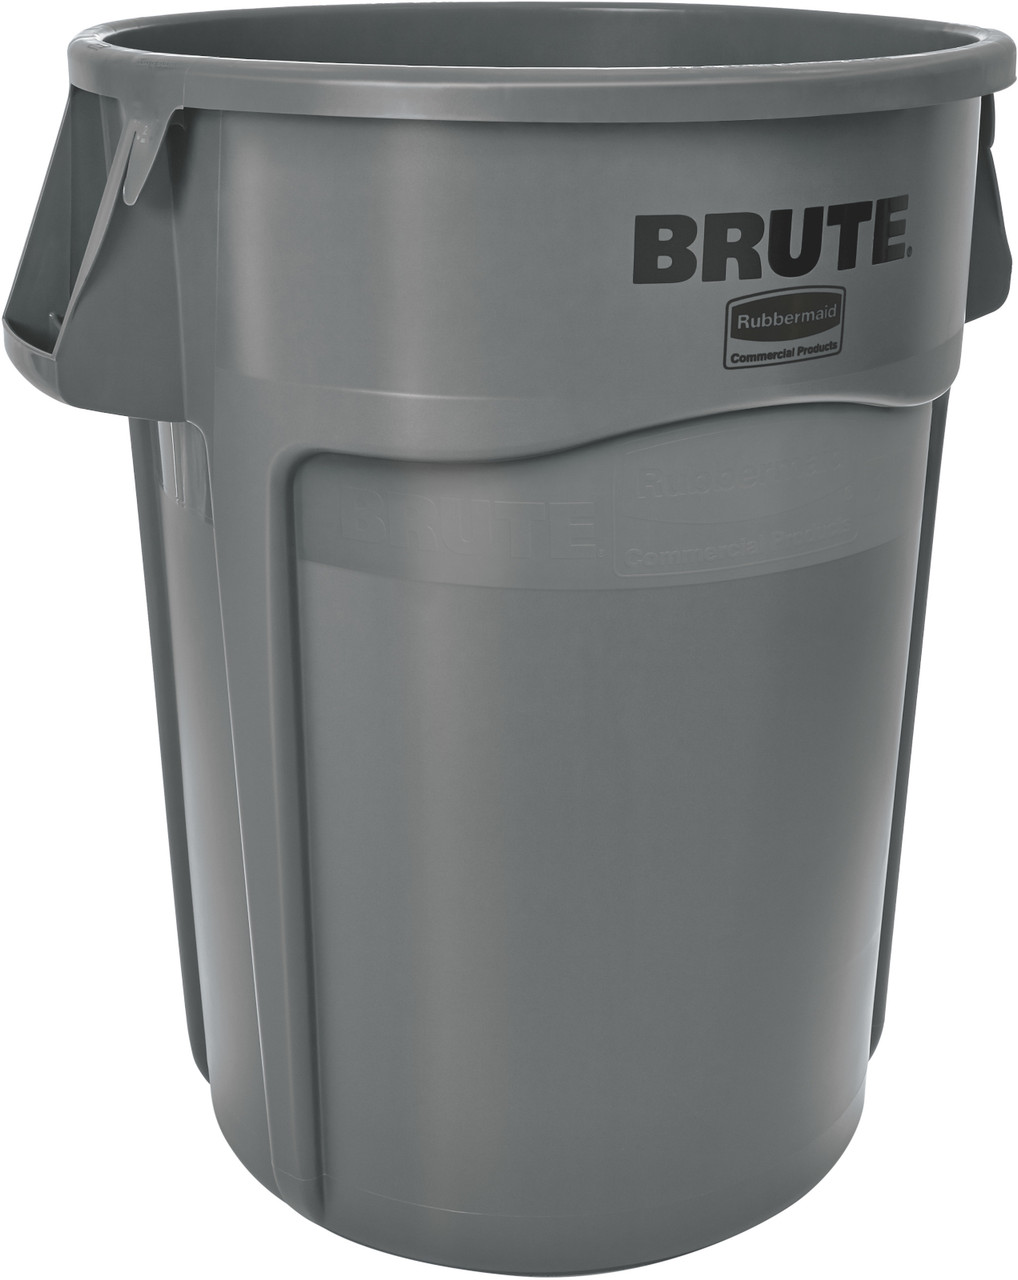 Rubbermaid Brute Container - 166.5 L - Grey - FG264360GRAY